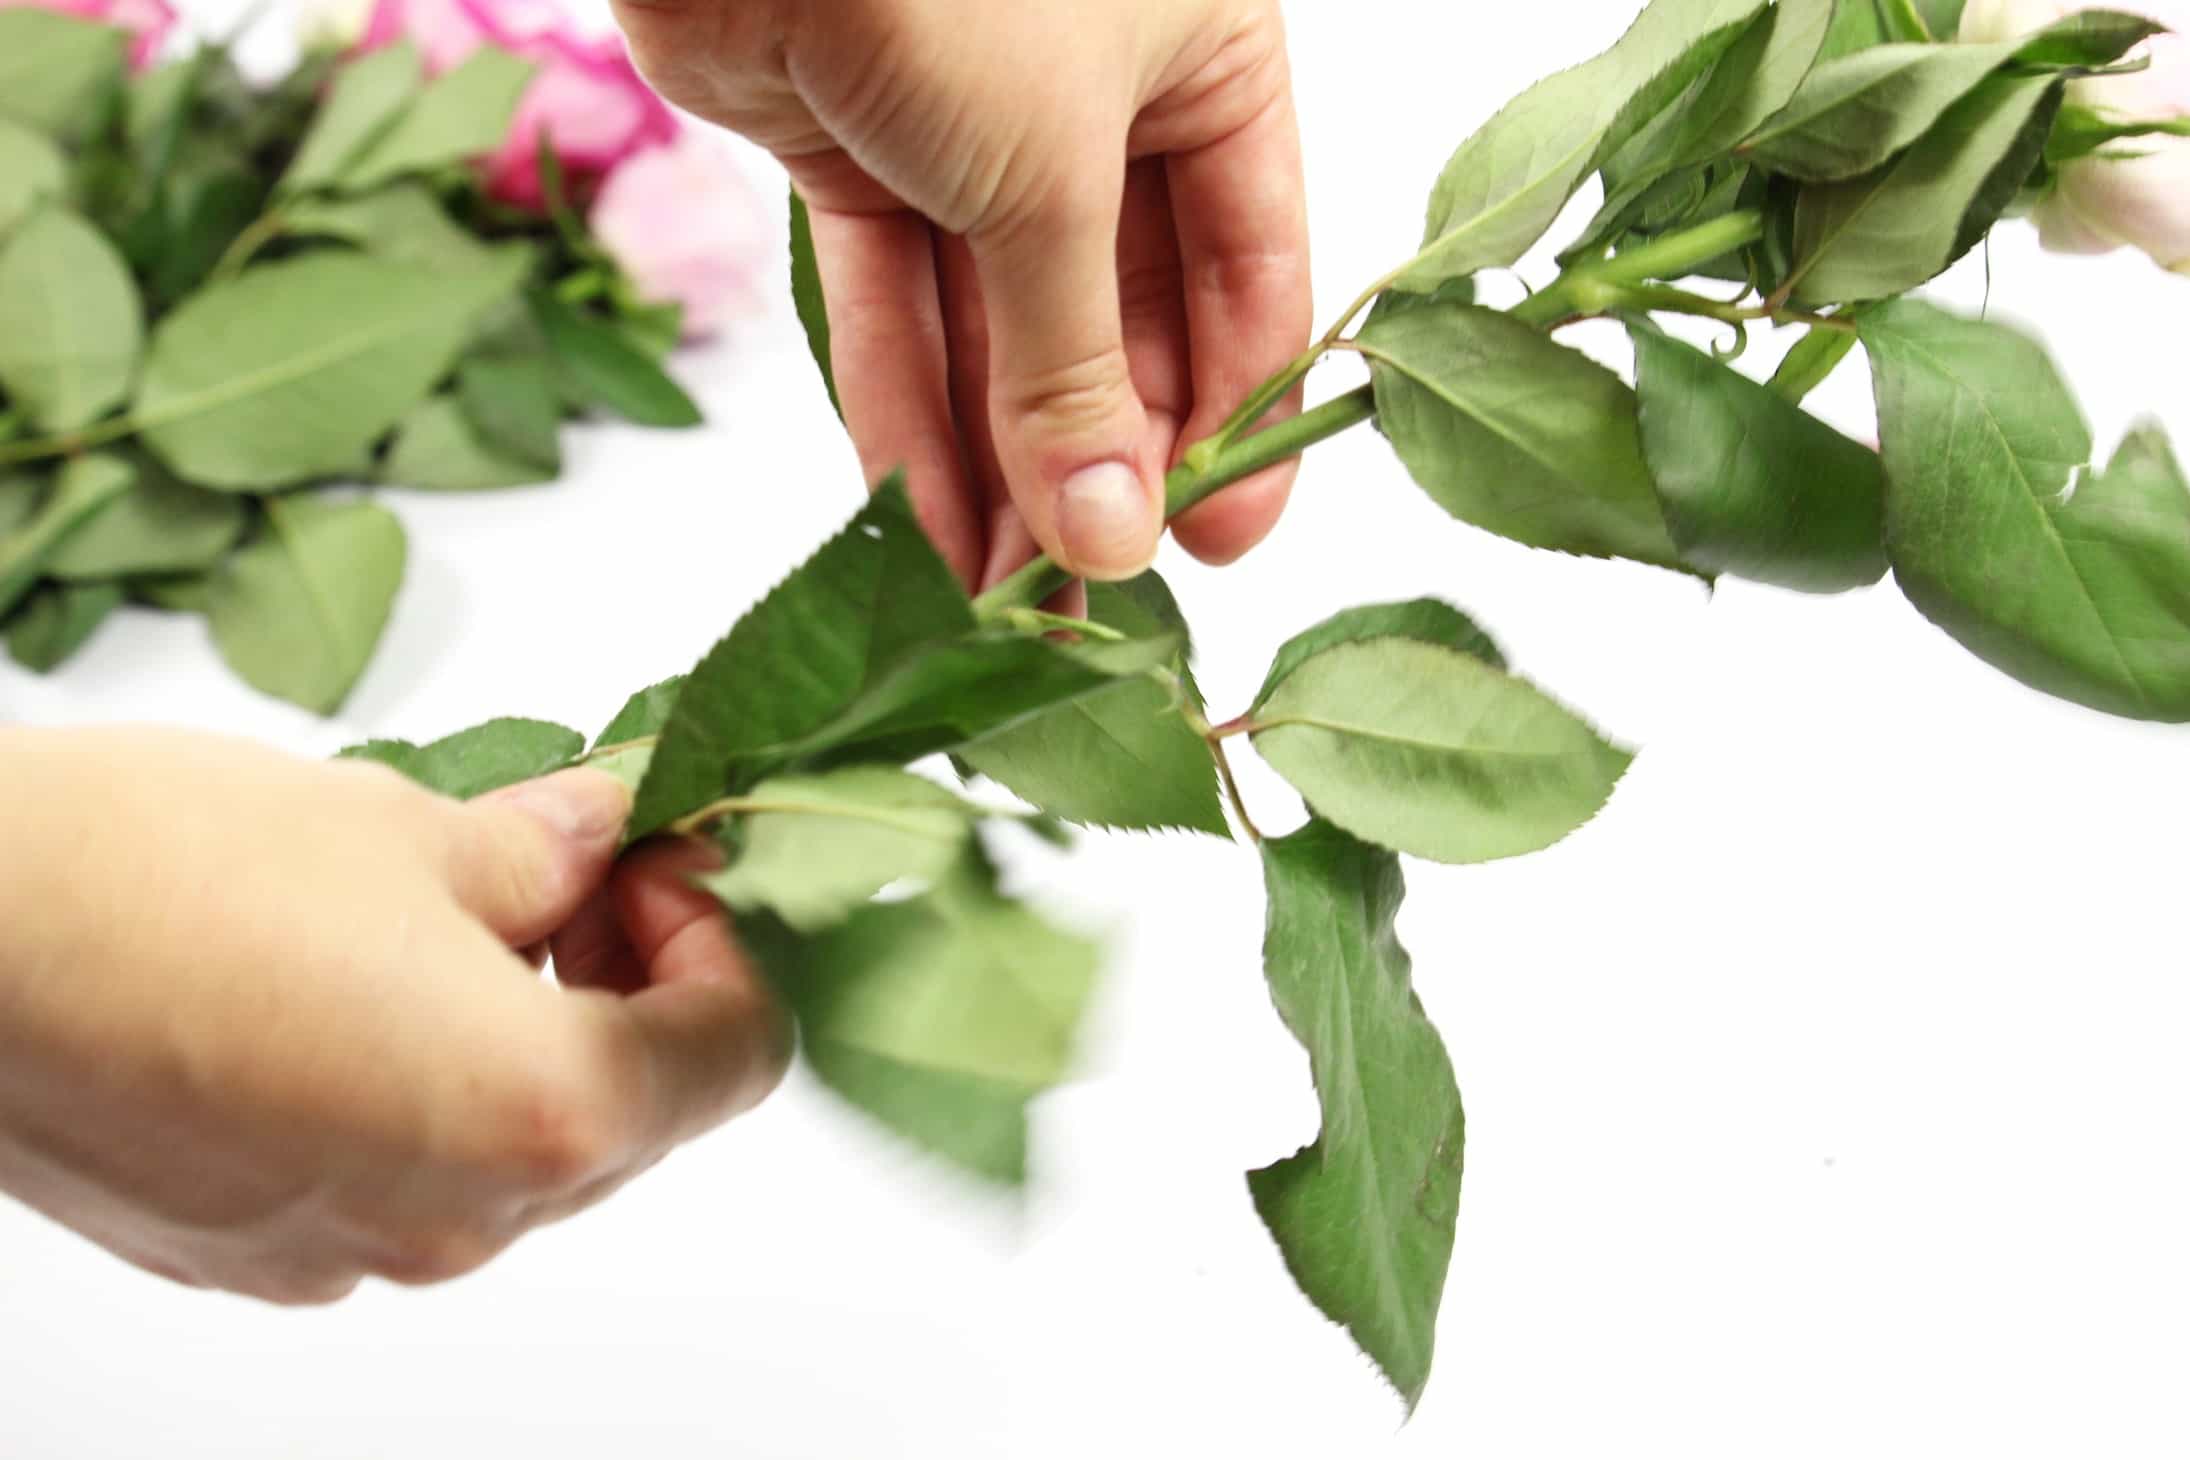 Removing leaves is one tip for best care for cut roses